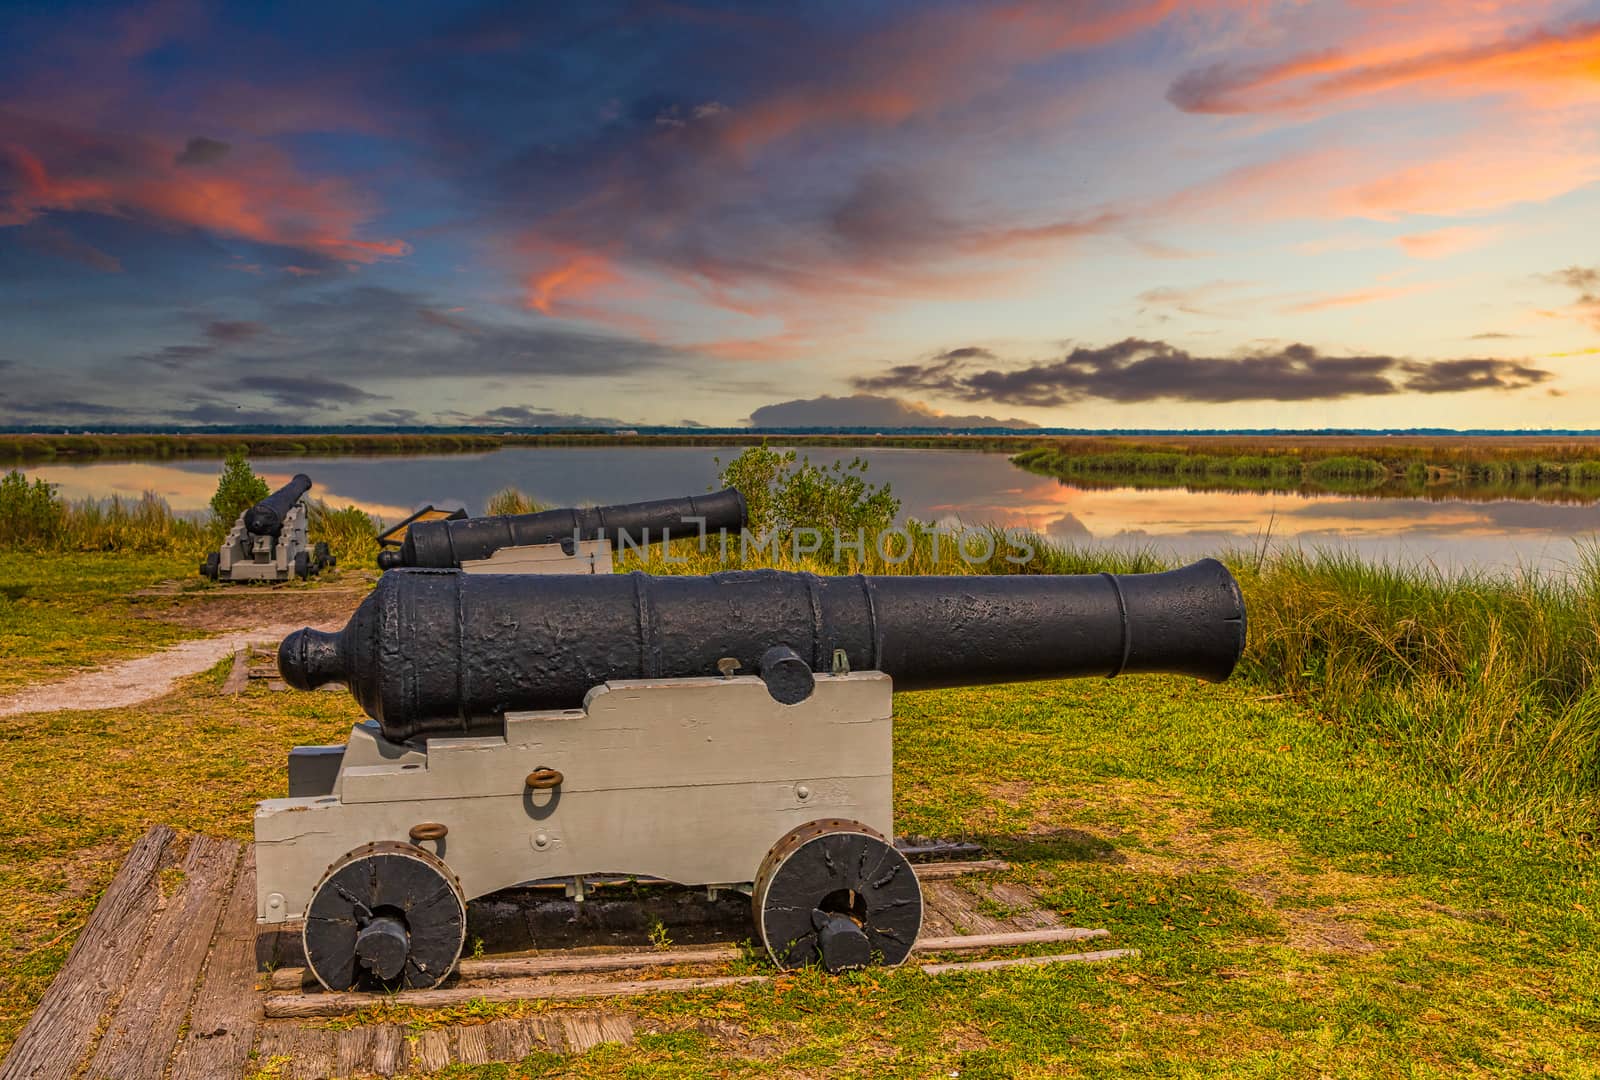 Cannons at Fortification at Sunset by dbvirago